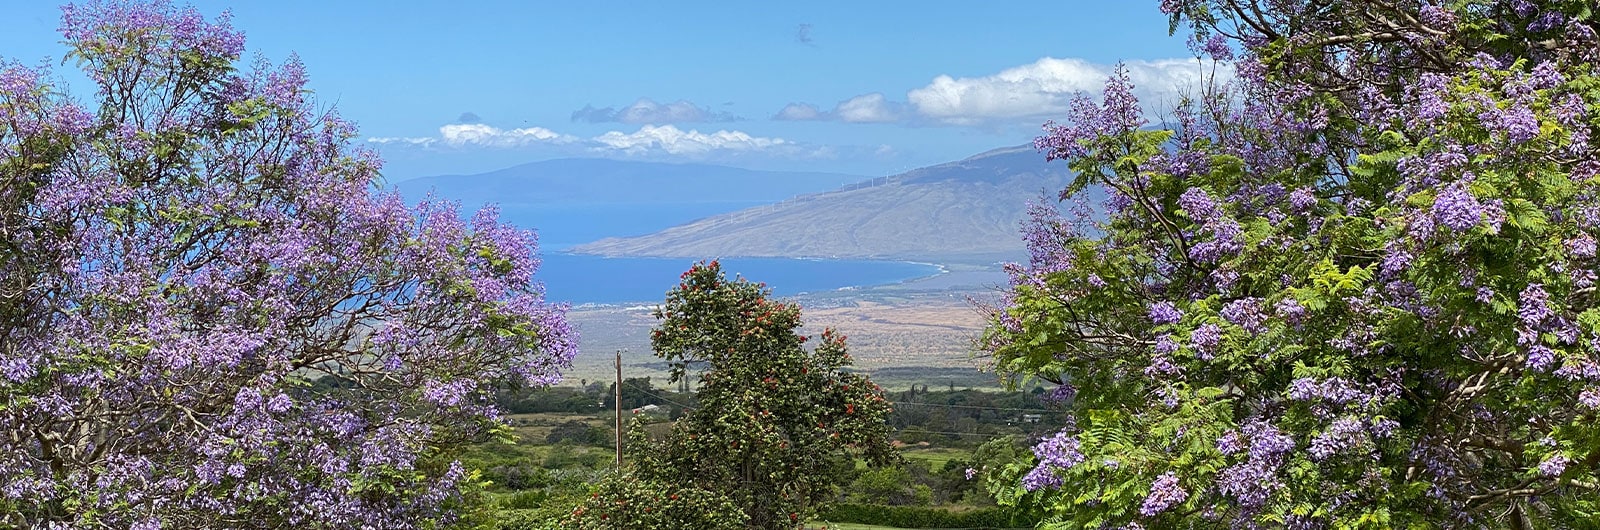 5 Things to do in Upcountry Maui